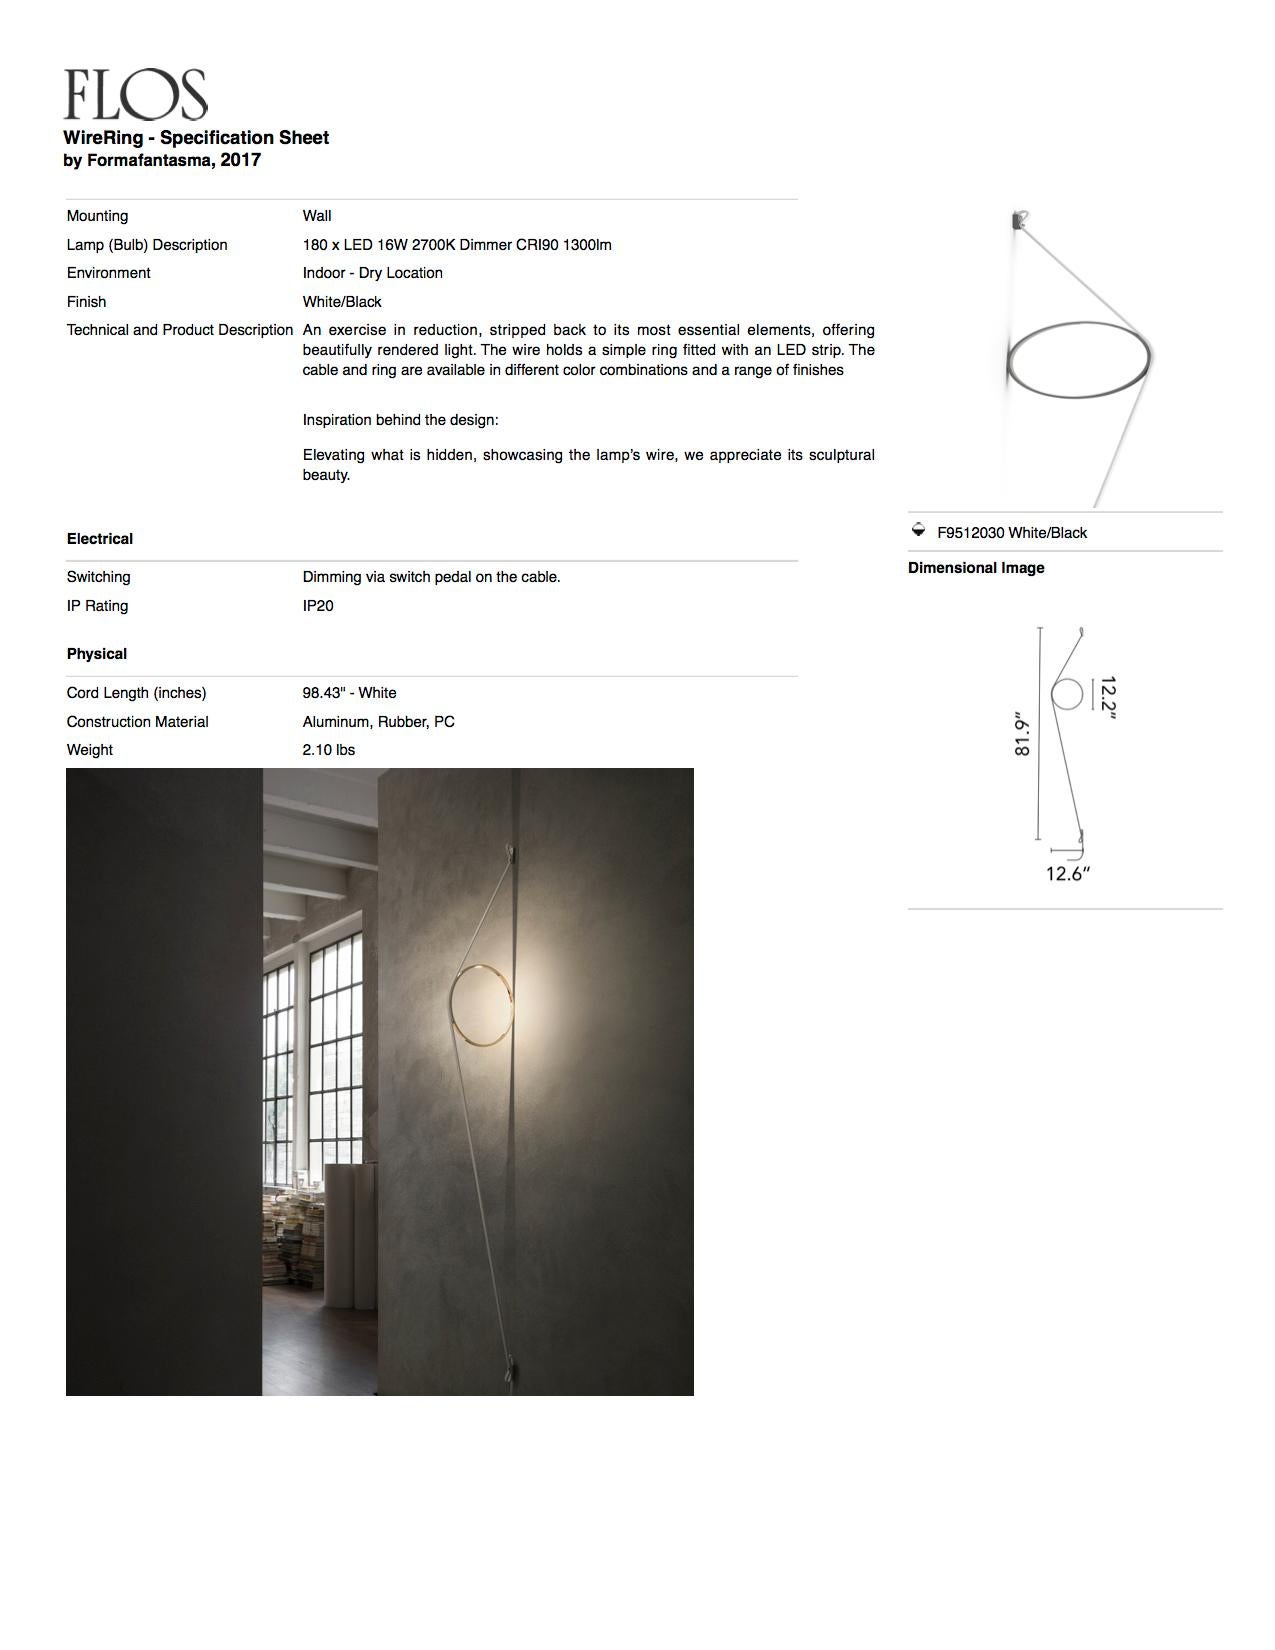 Aluminum FLOS Wirering Wall Light in Grey and Gold by Formafantasma For Sale